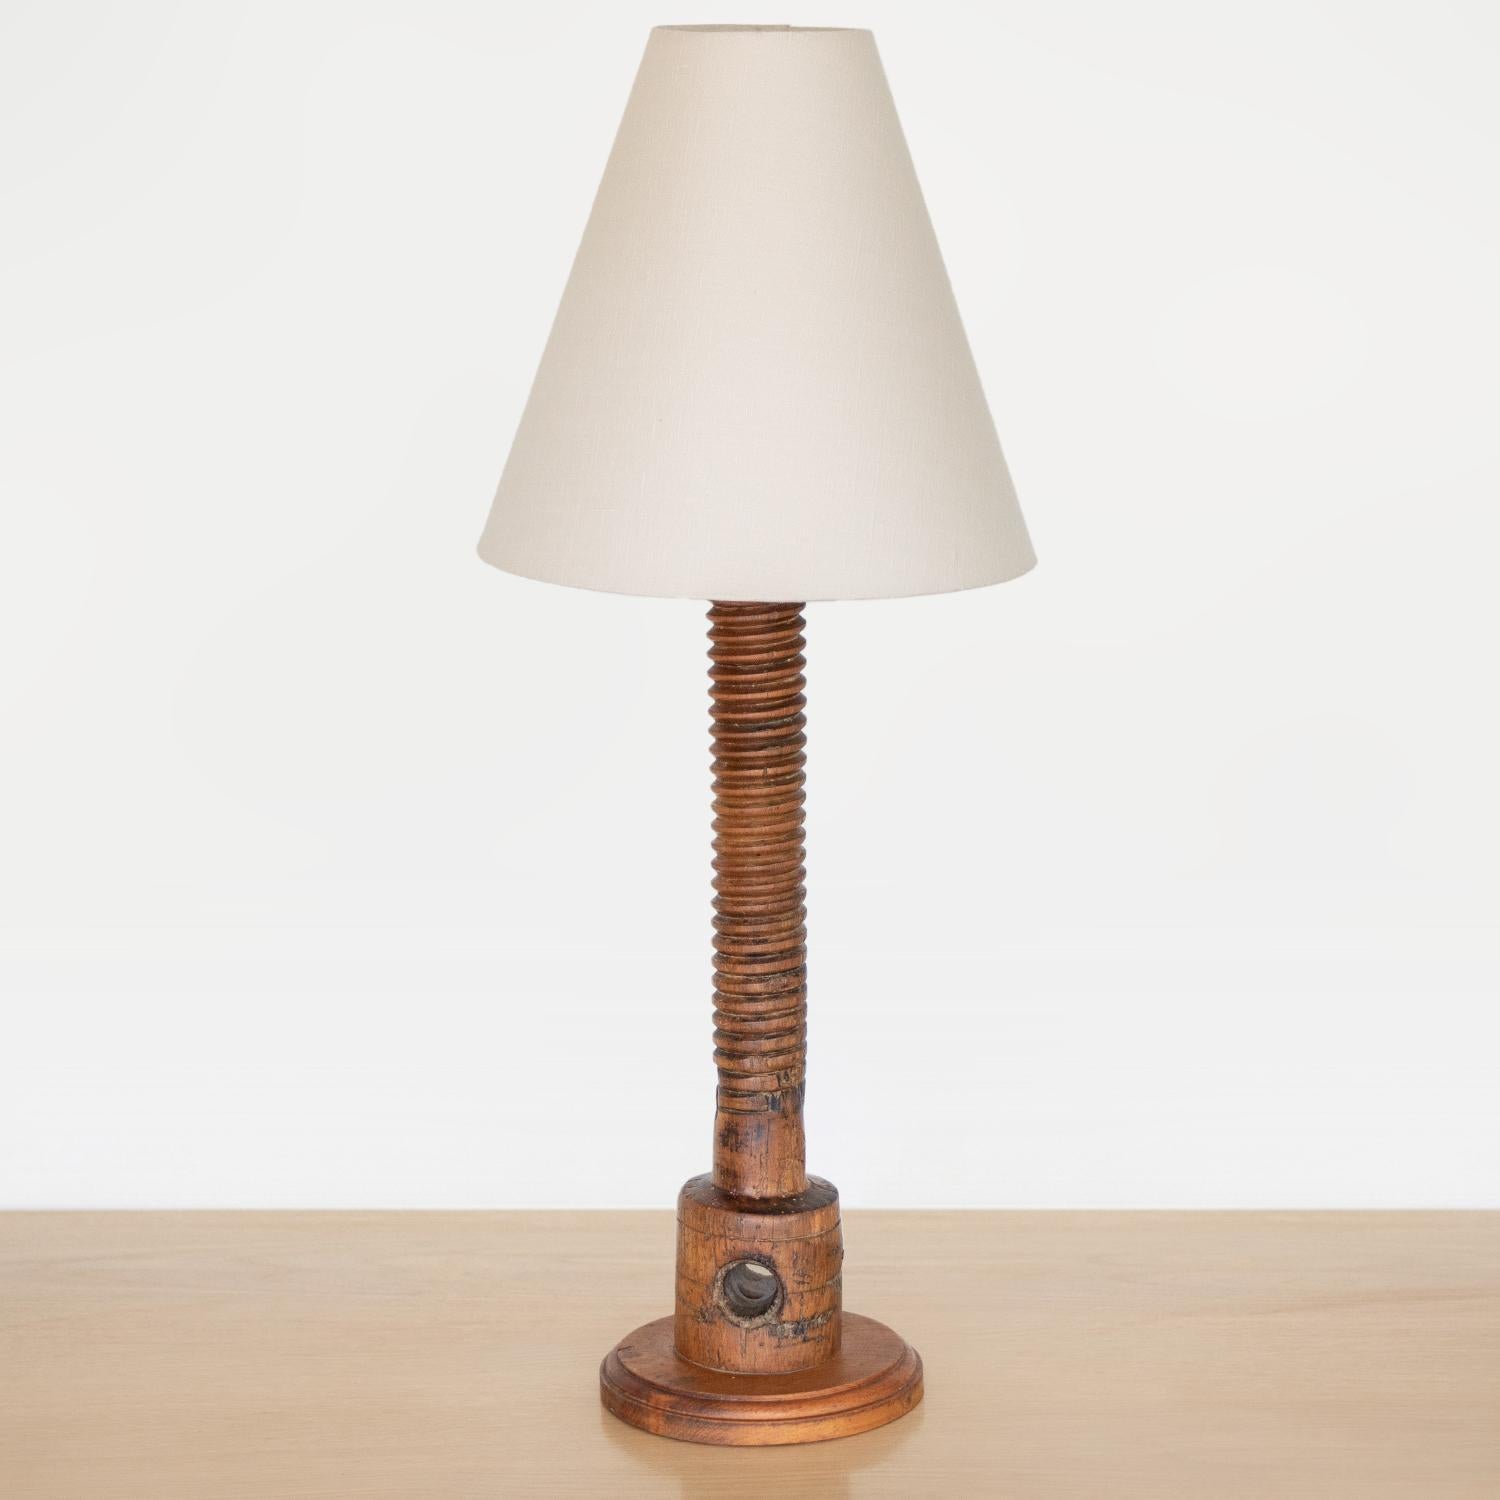 Tall hand carved wood table lamp from France, 1940s in the style of Charles Dudouyt. Twisted carved wood stem with wood block base and carved hole. Original wood finish showing nice age and patina. New tapered linen shade and newly re-wired. Takes